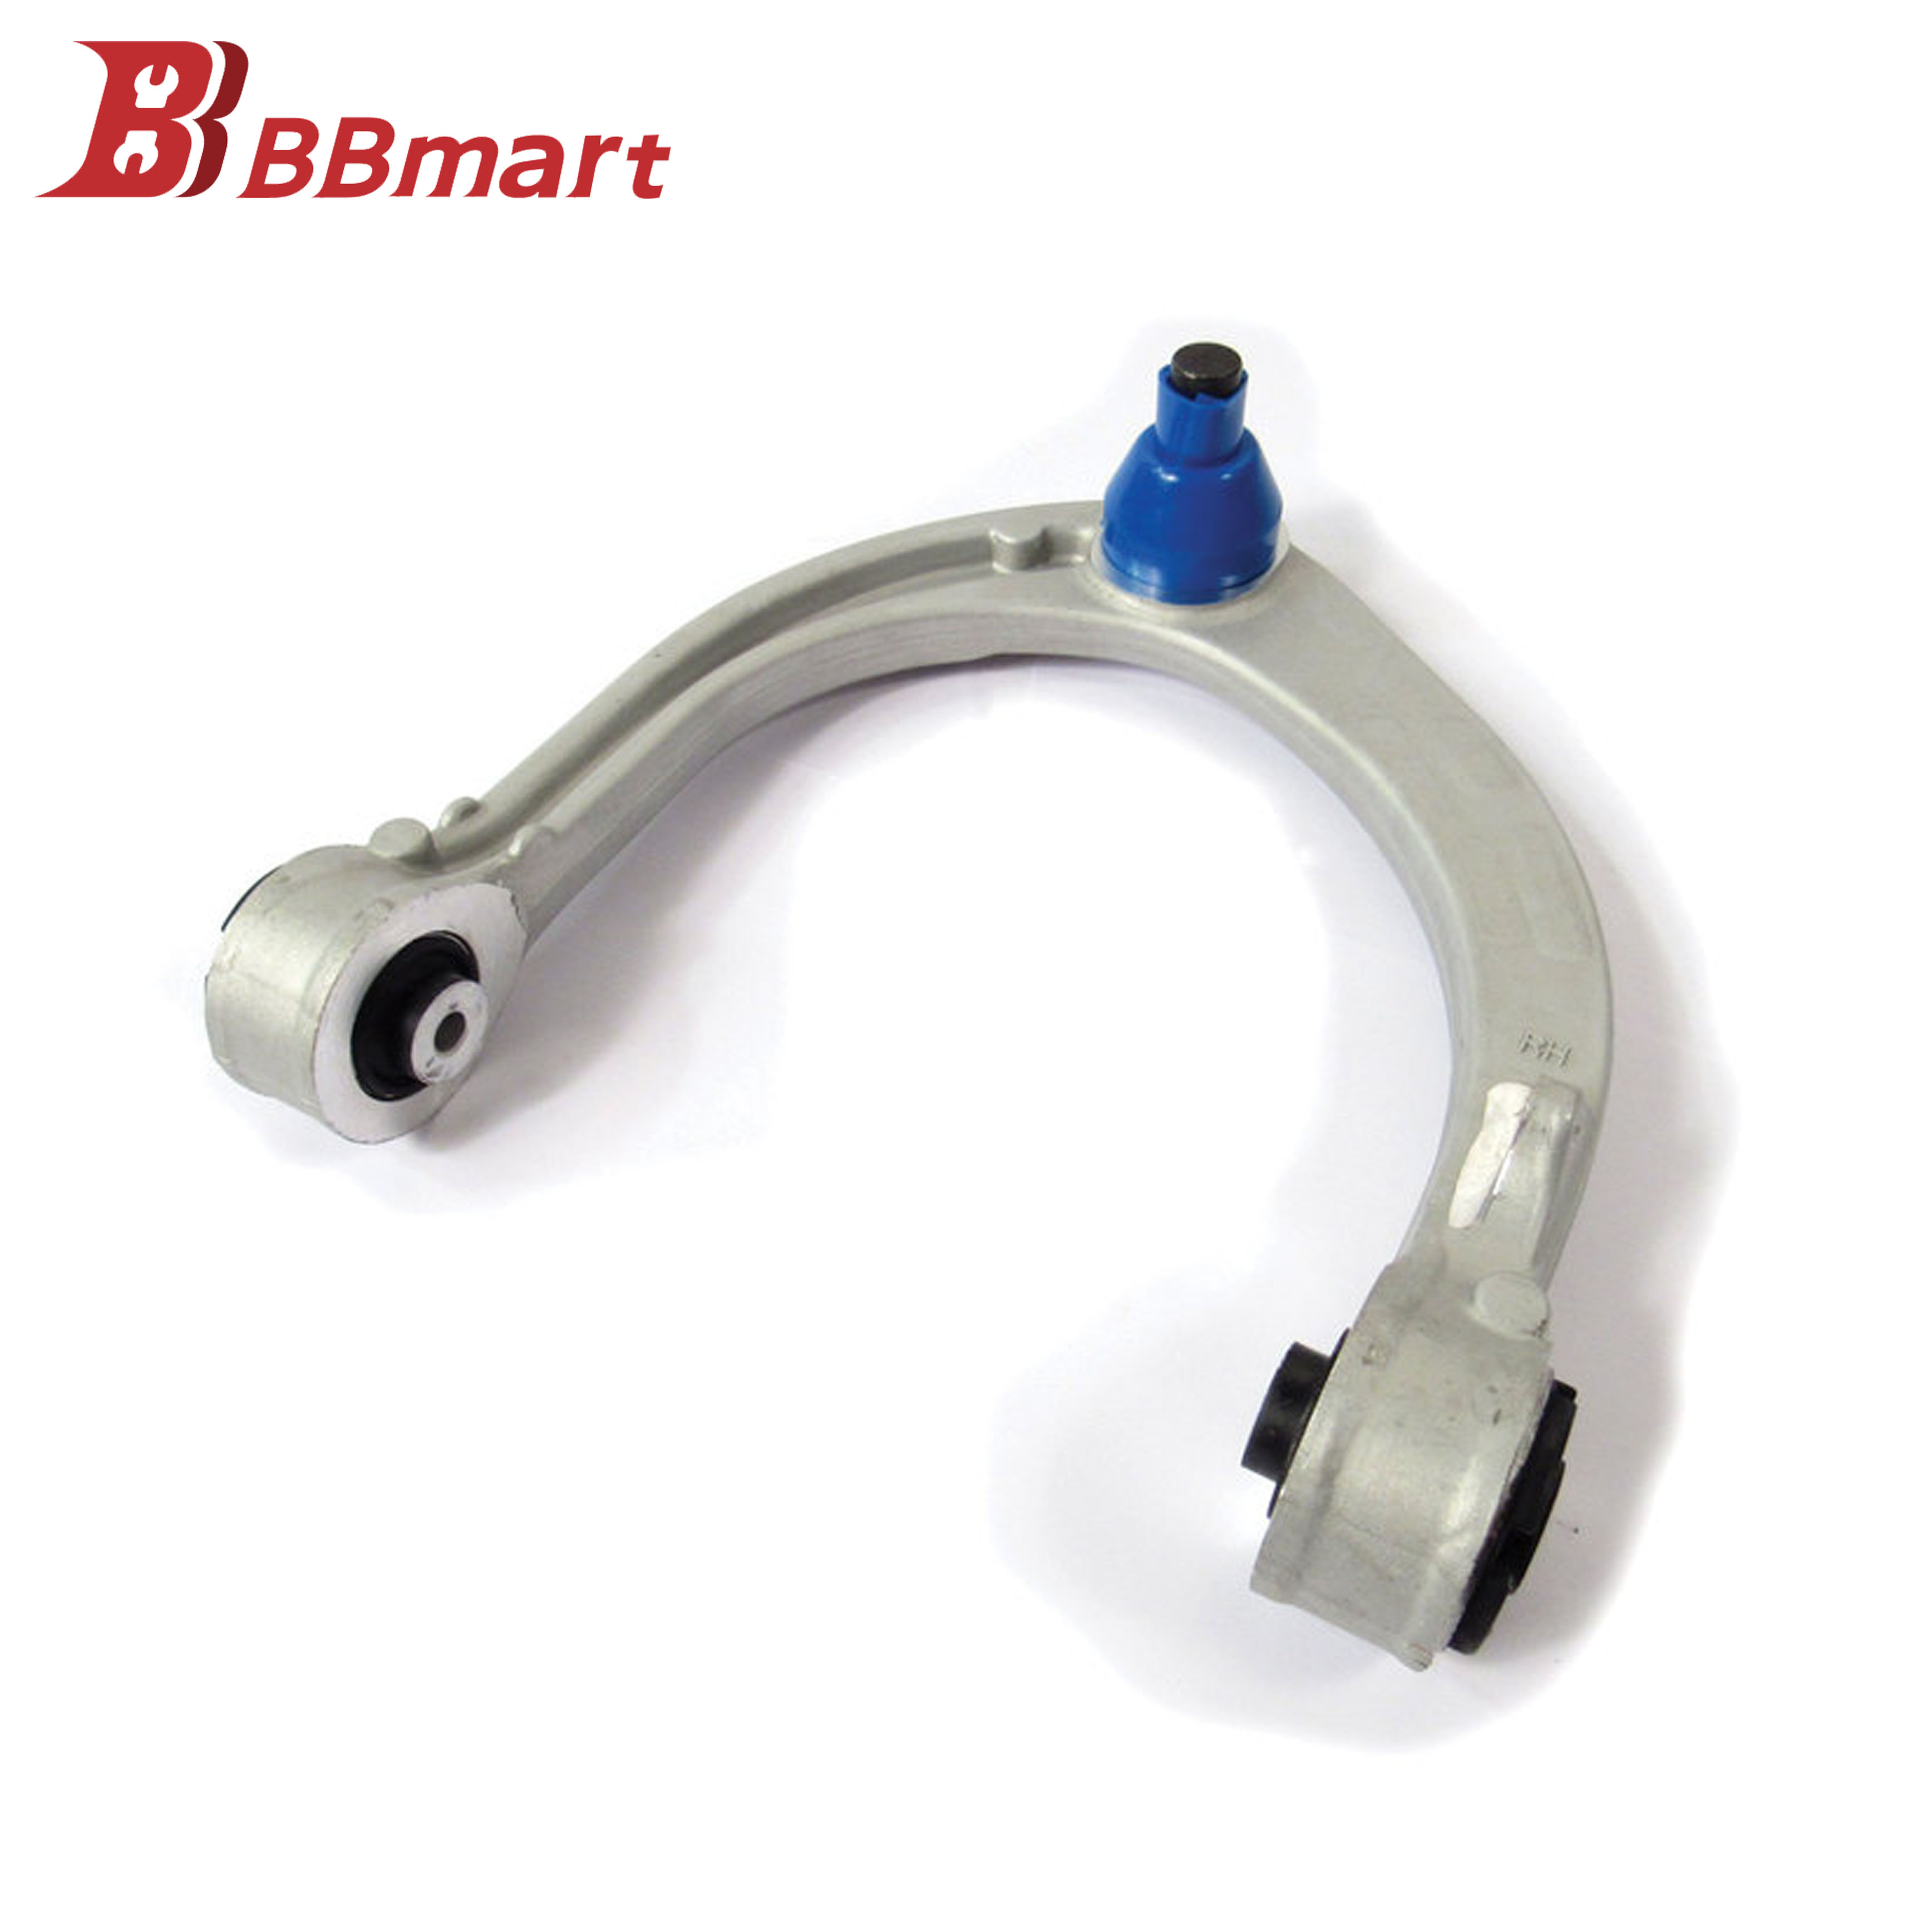 BBmart Auto Parts Front Upper Right Control Arm For Land Rover RANGE ROVER OE LR034211